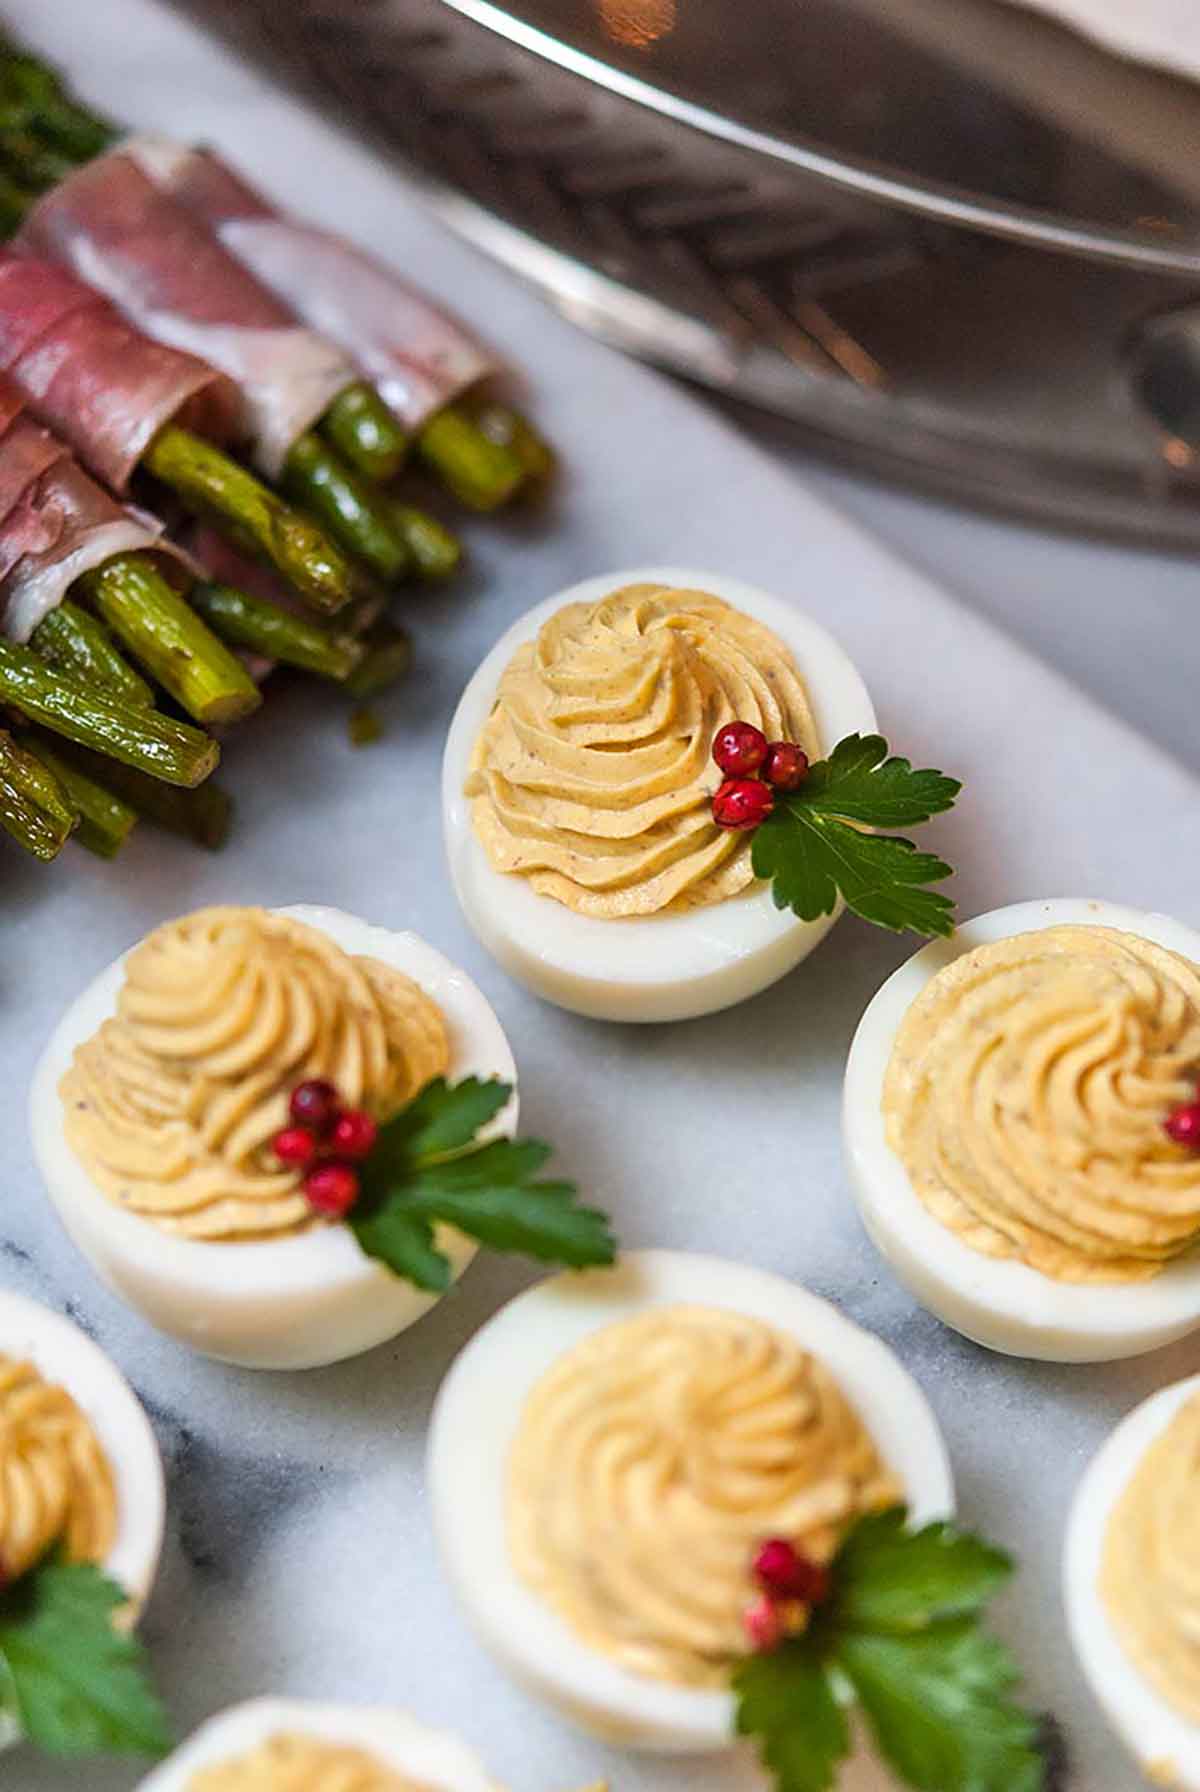 4 deviled eggs garnished with pink peppercorns and parsley, surrounded by other deviled eggs and asparagus.